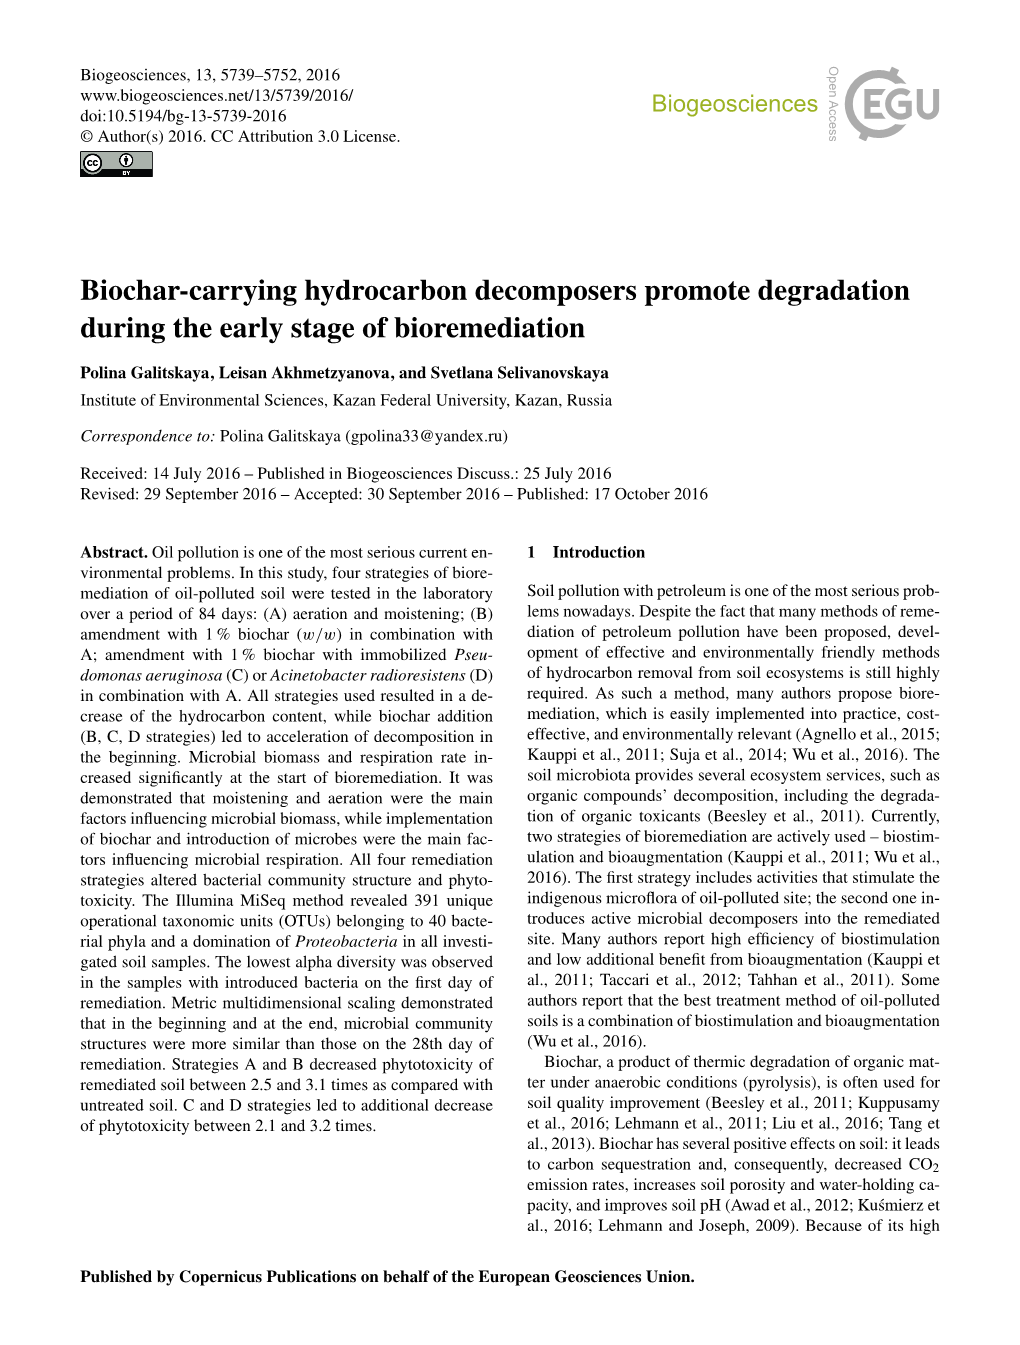 Article Is Available Online at Doi:10.5194/Bg-13-5739-2016-Supplement